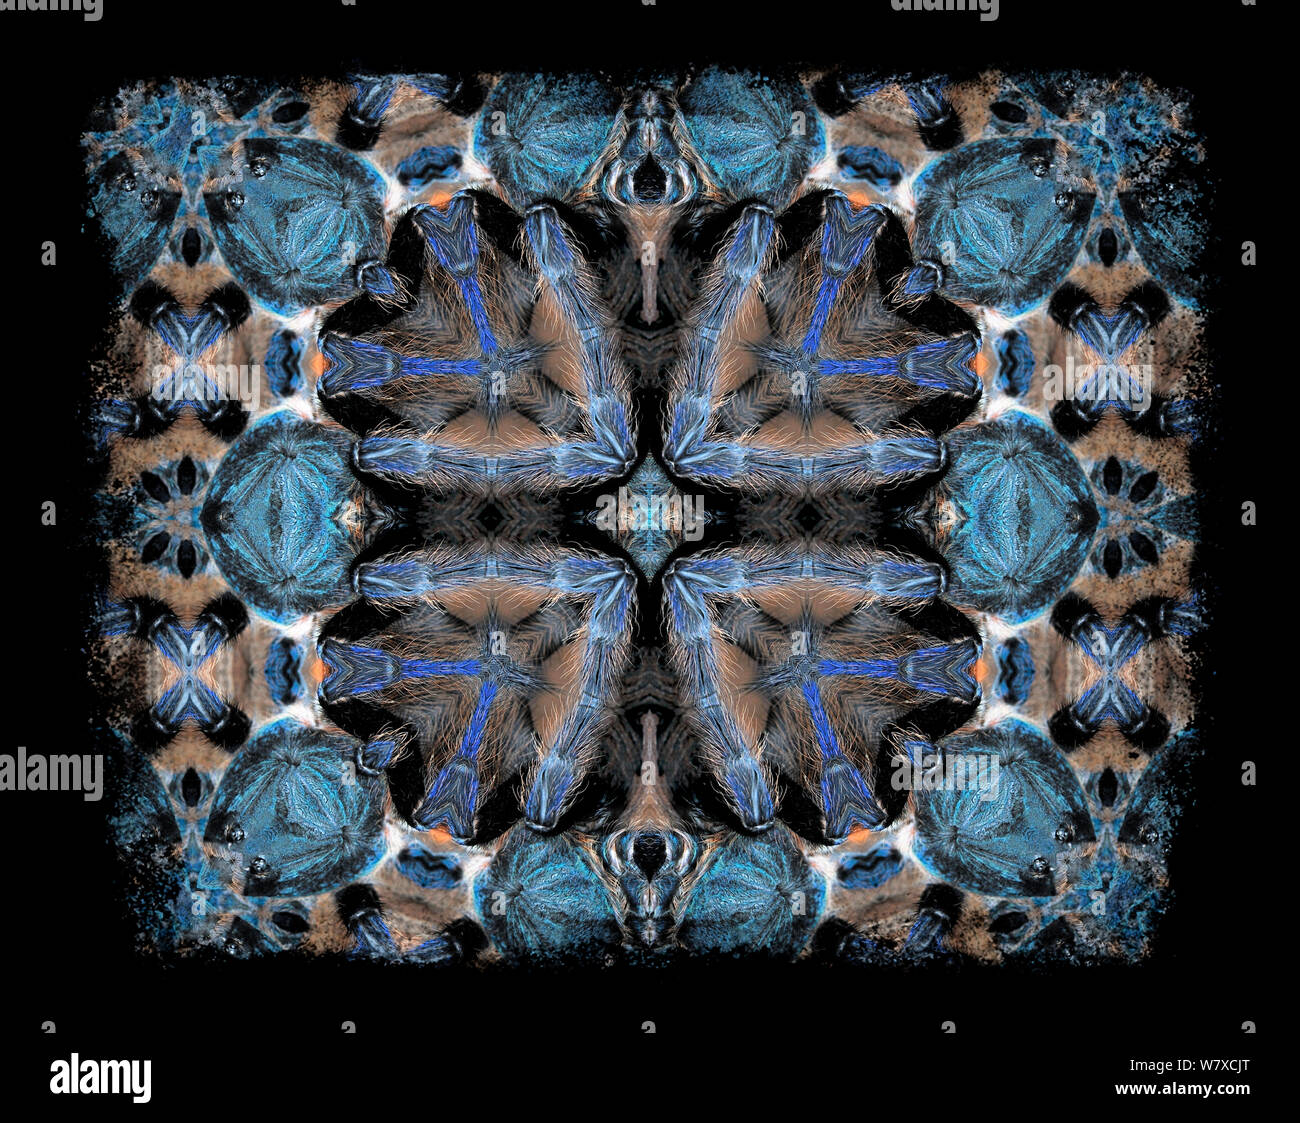 Kaleidoscope pattern formed from picture of Greenbottle blue tarantula (Chromatopelma cyaneopubescens) - see original image number 01482830 EMBARGOED FOR NAT GEO UNTIL the end of 2015 Stock Photo